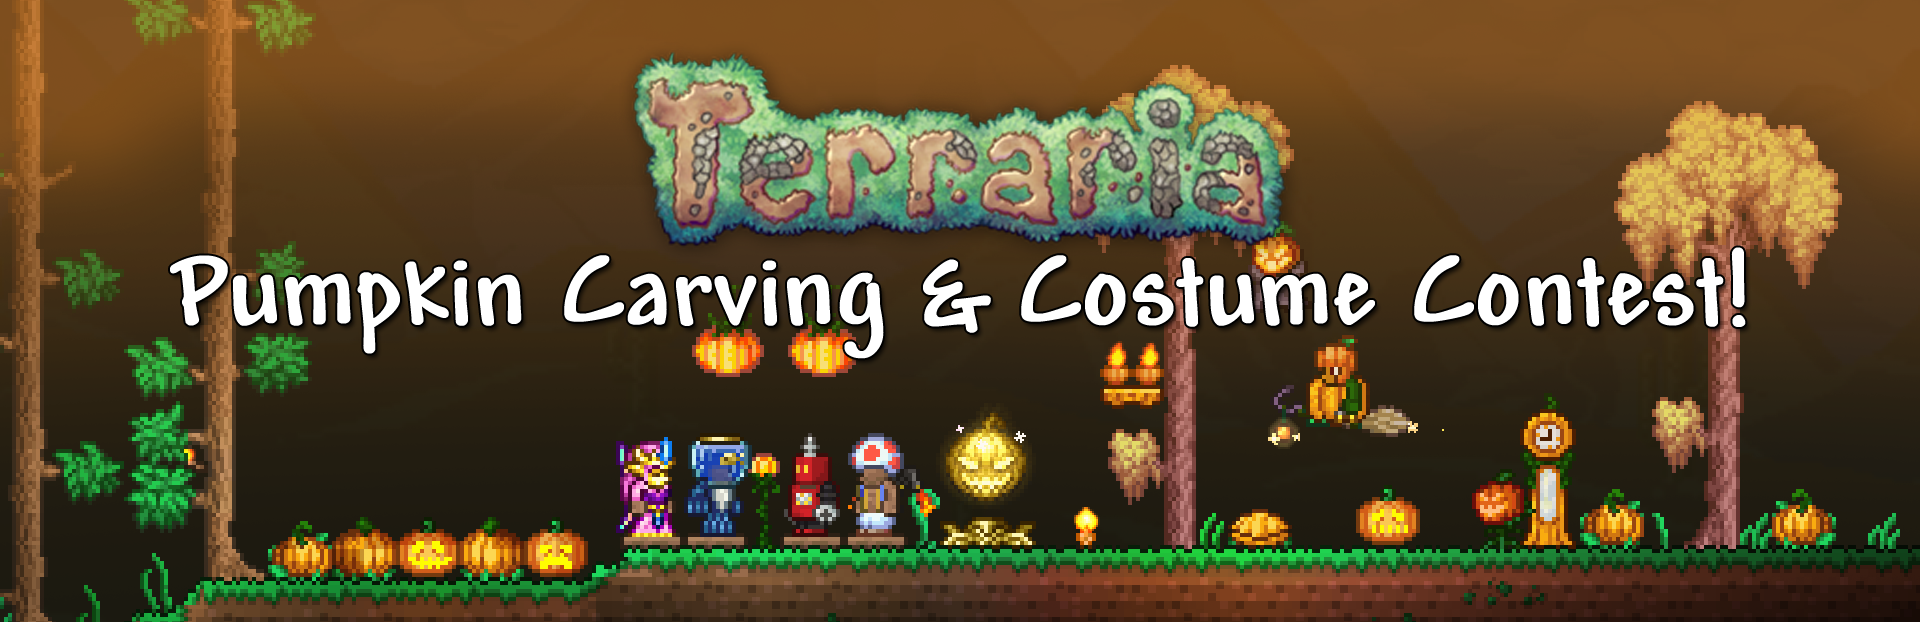 Terraria and Don't Starve Together Collaboration Live